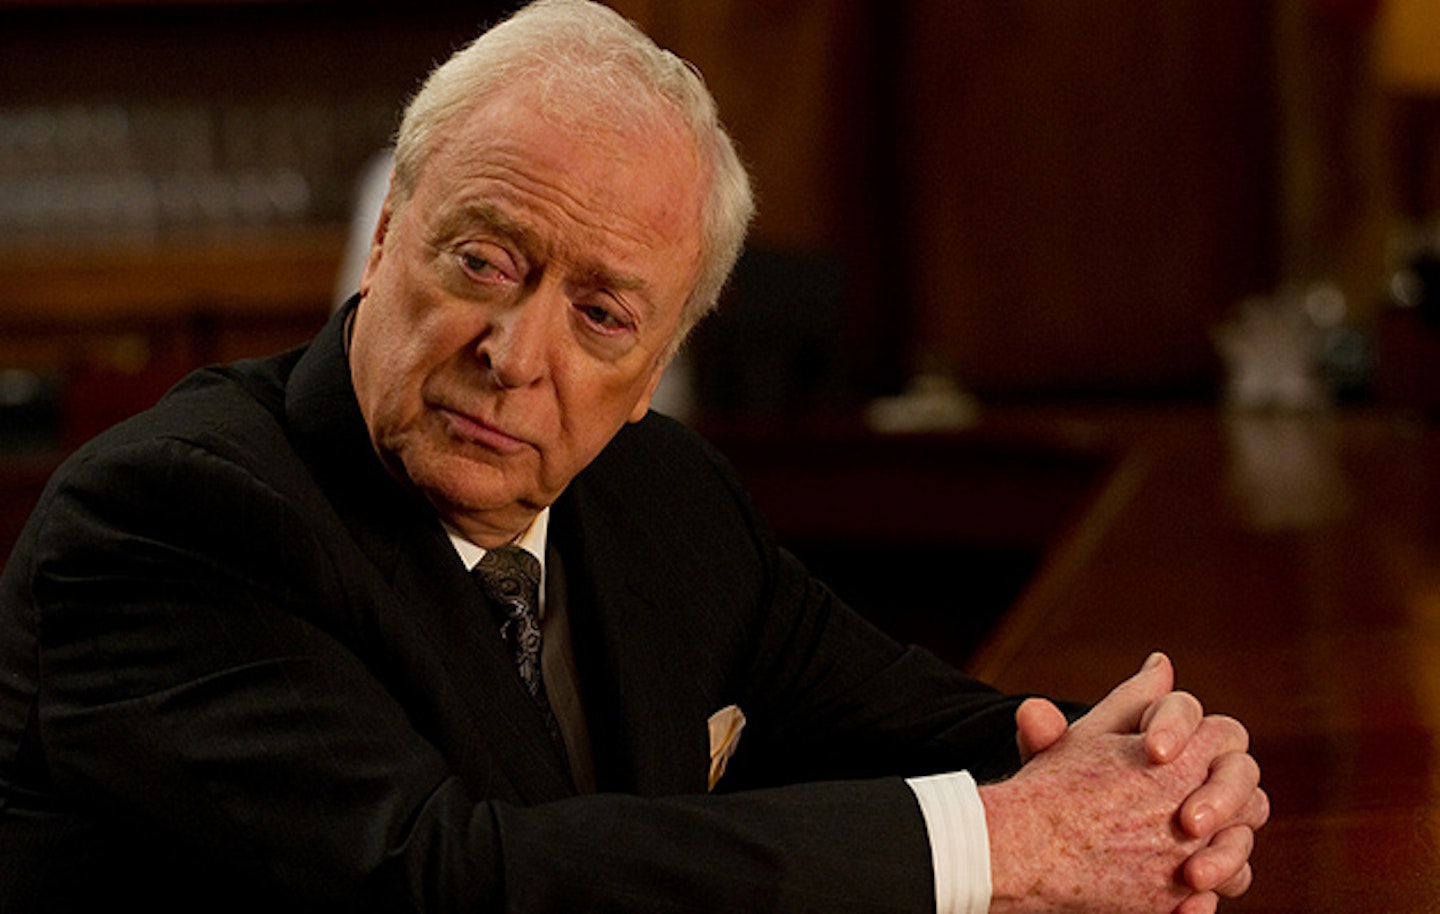 Michael-Caine-Last-Witch-Hunter